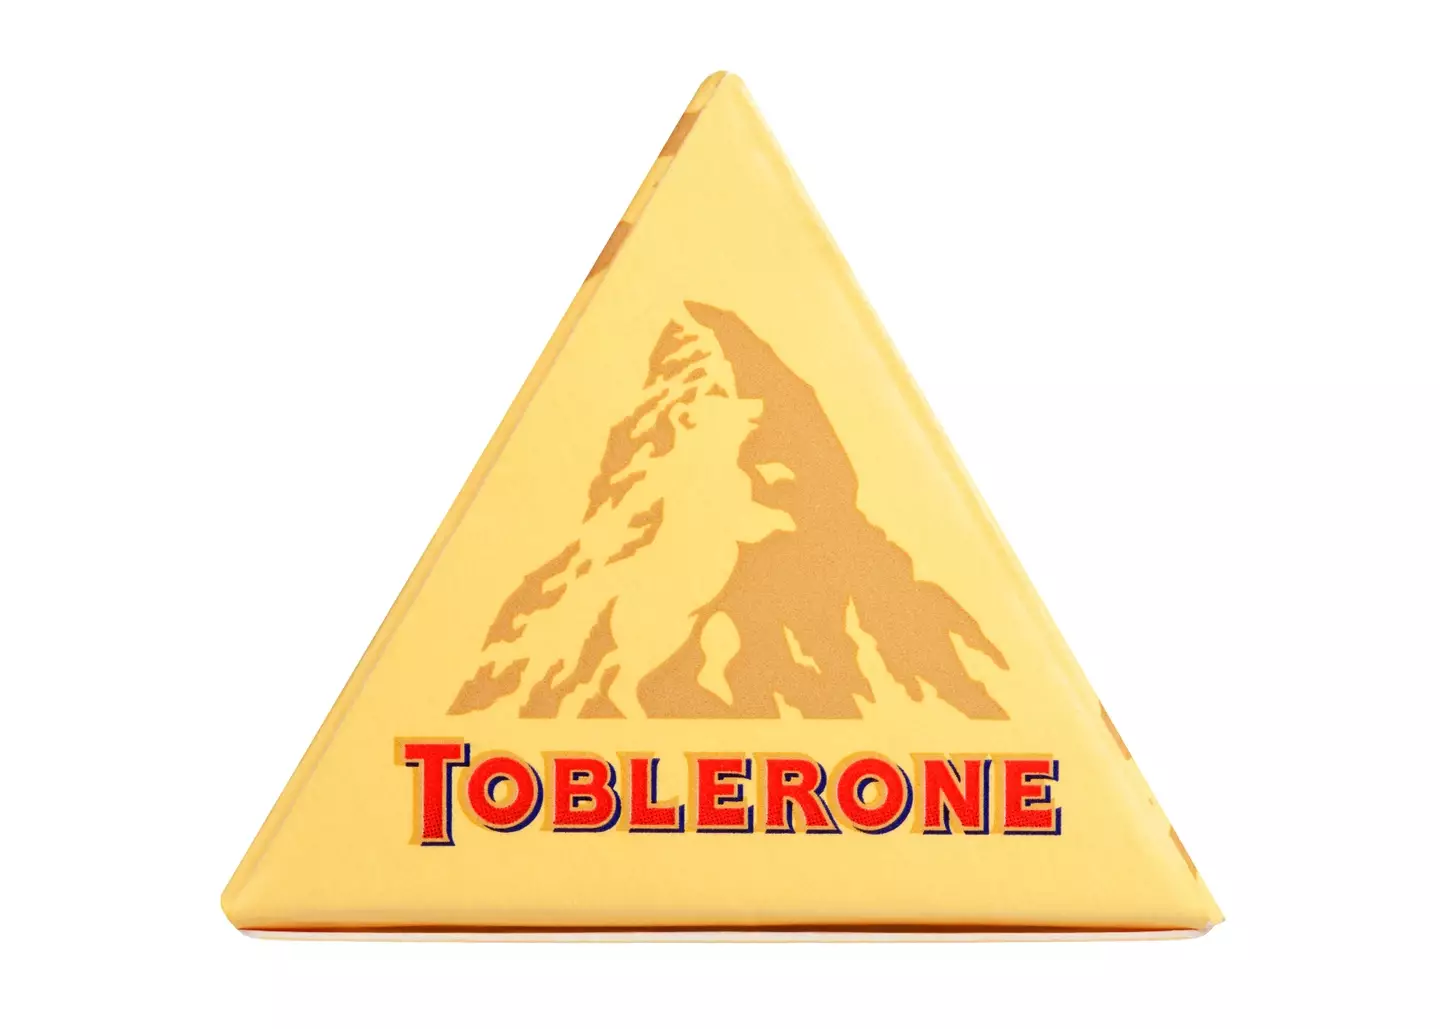 The logo will no longer be able to feature the Matterhorn.